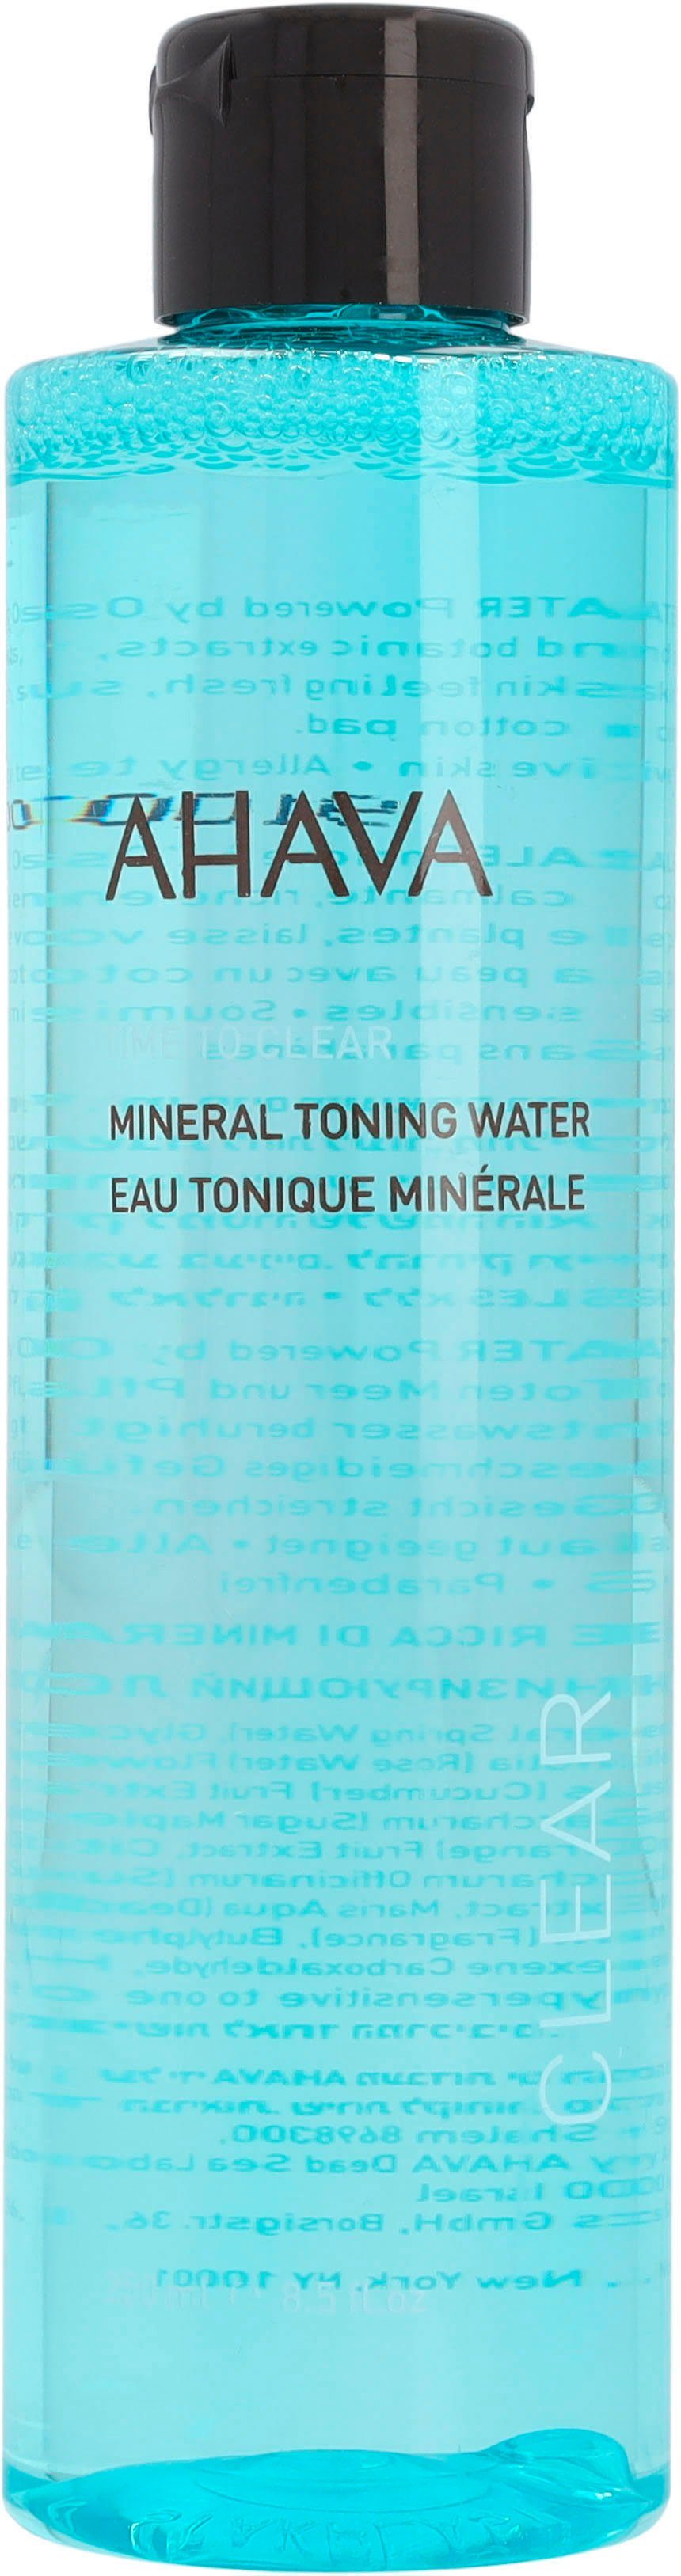 Water Time Toning To Mineral AHAVA Clear Gesichtswasser